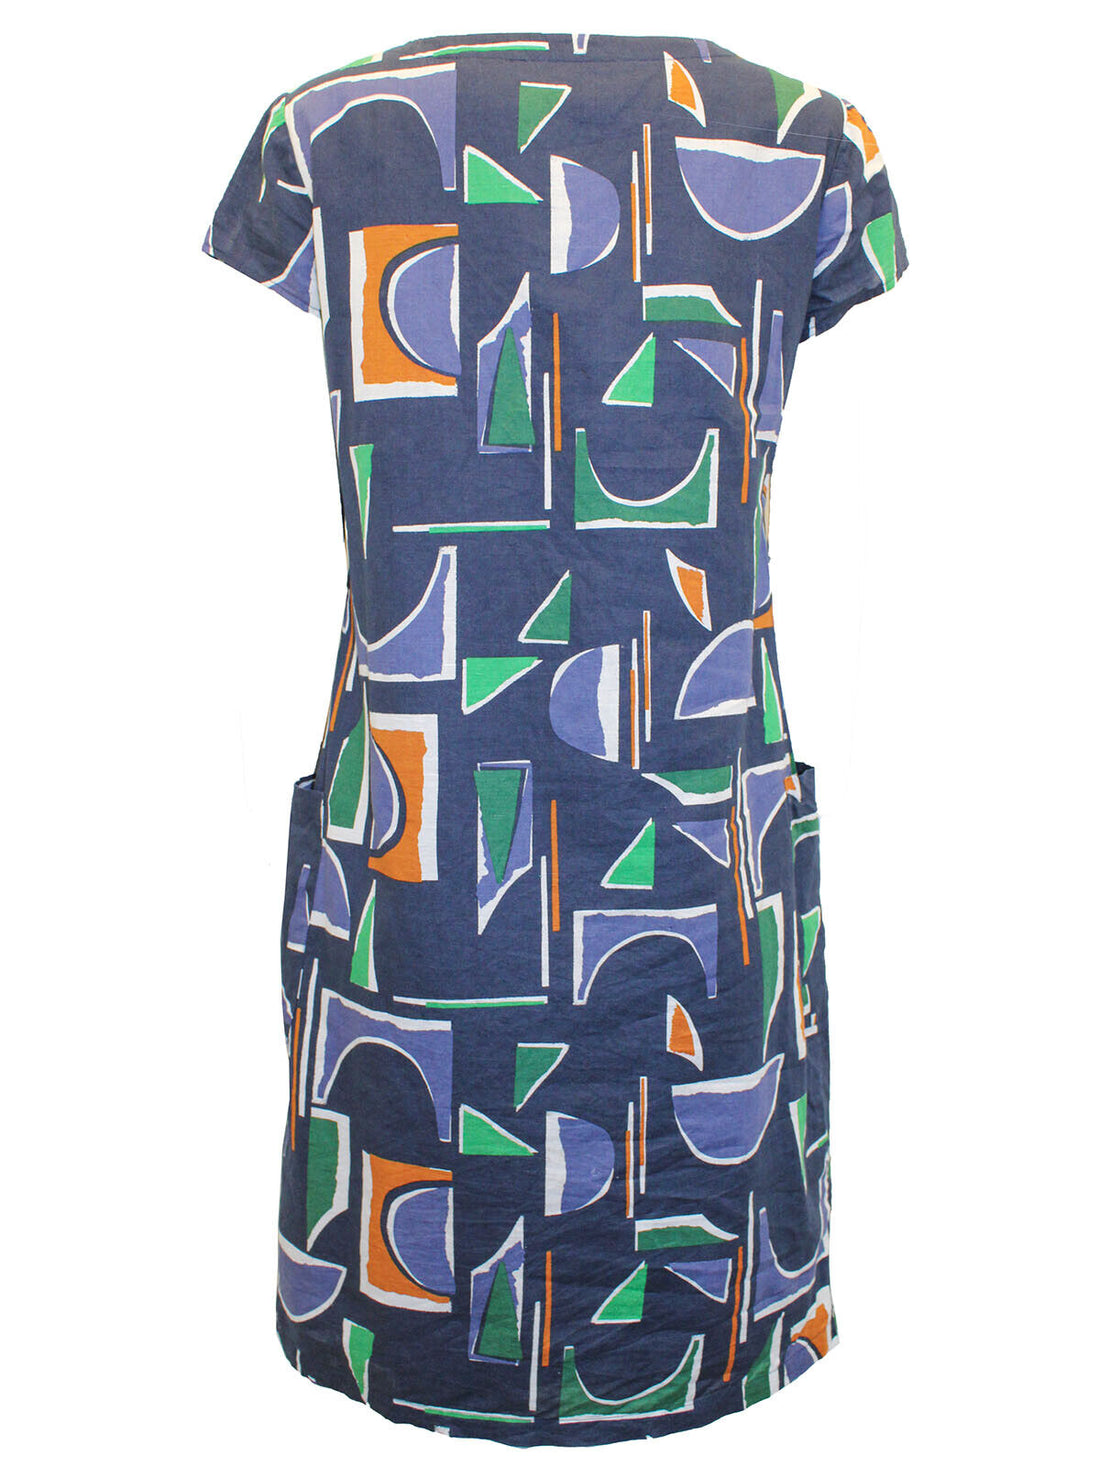 EX Seasalt Navy Wood Collage River Cove Shift Dress 10 12 14 16 20 22 24 RRP £70